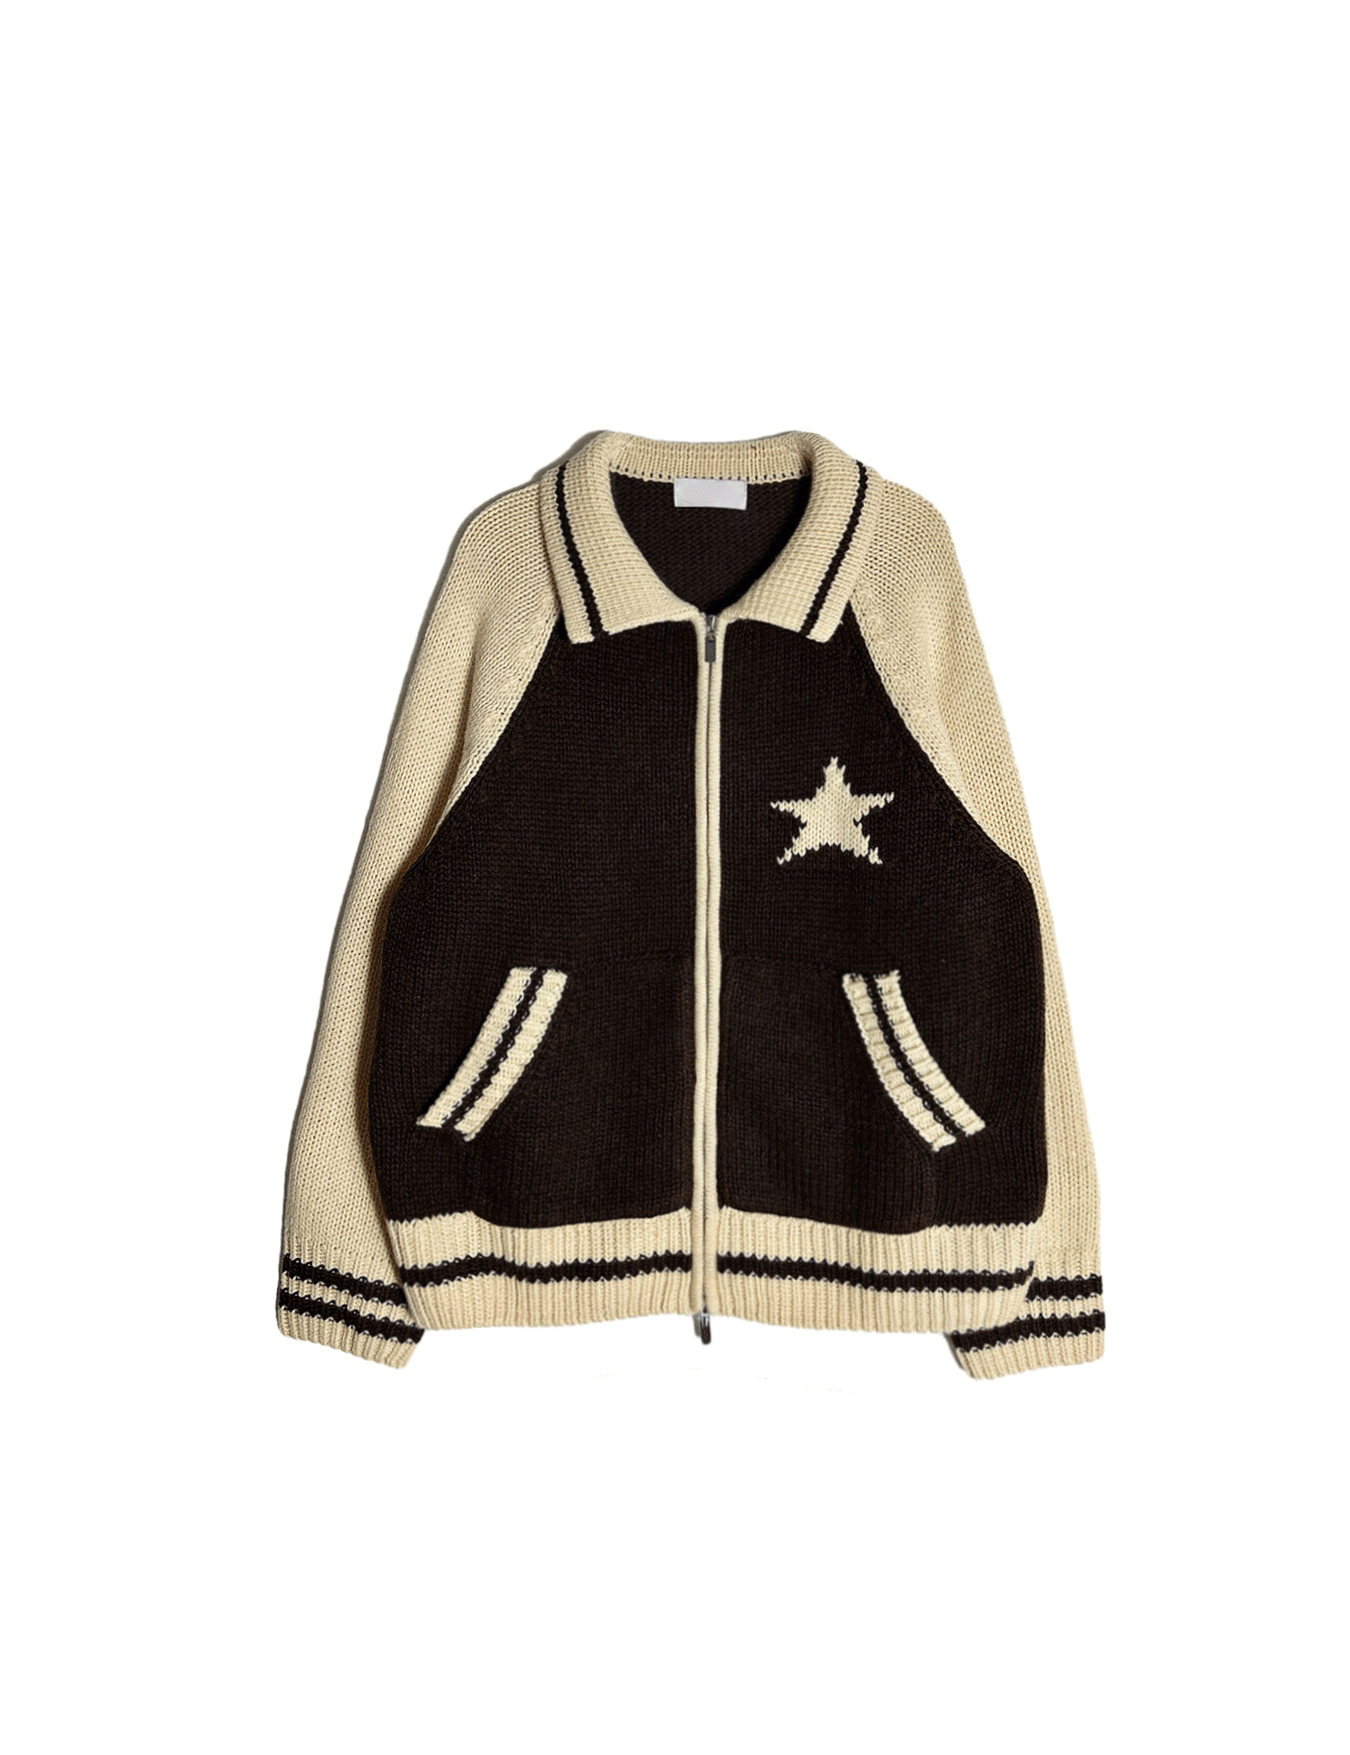 star knitting zip-up (2color)